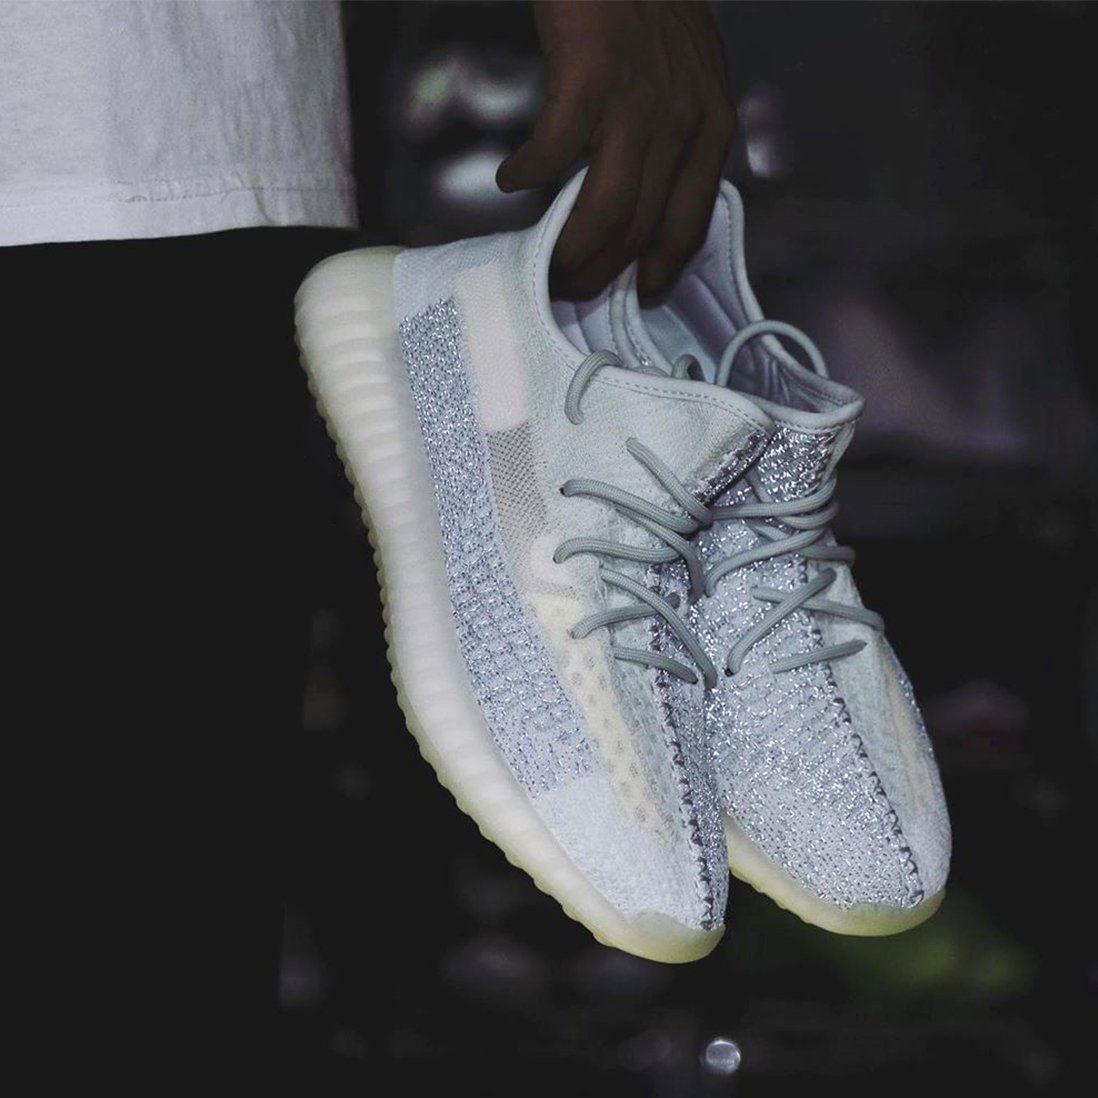 yeezy cloud white release time